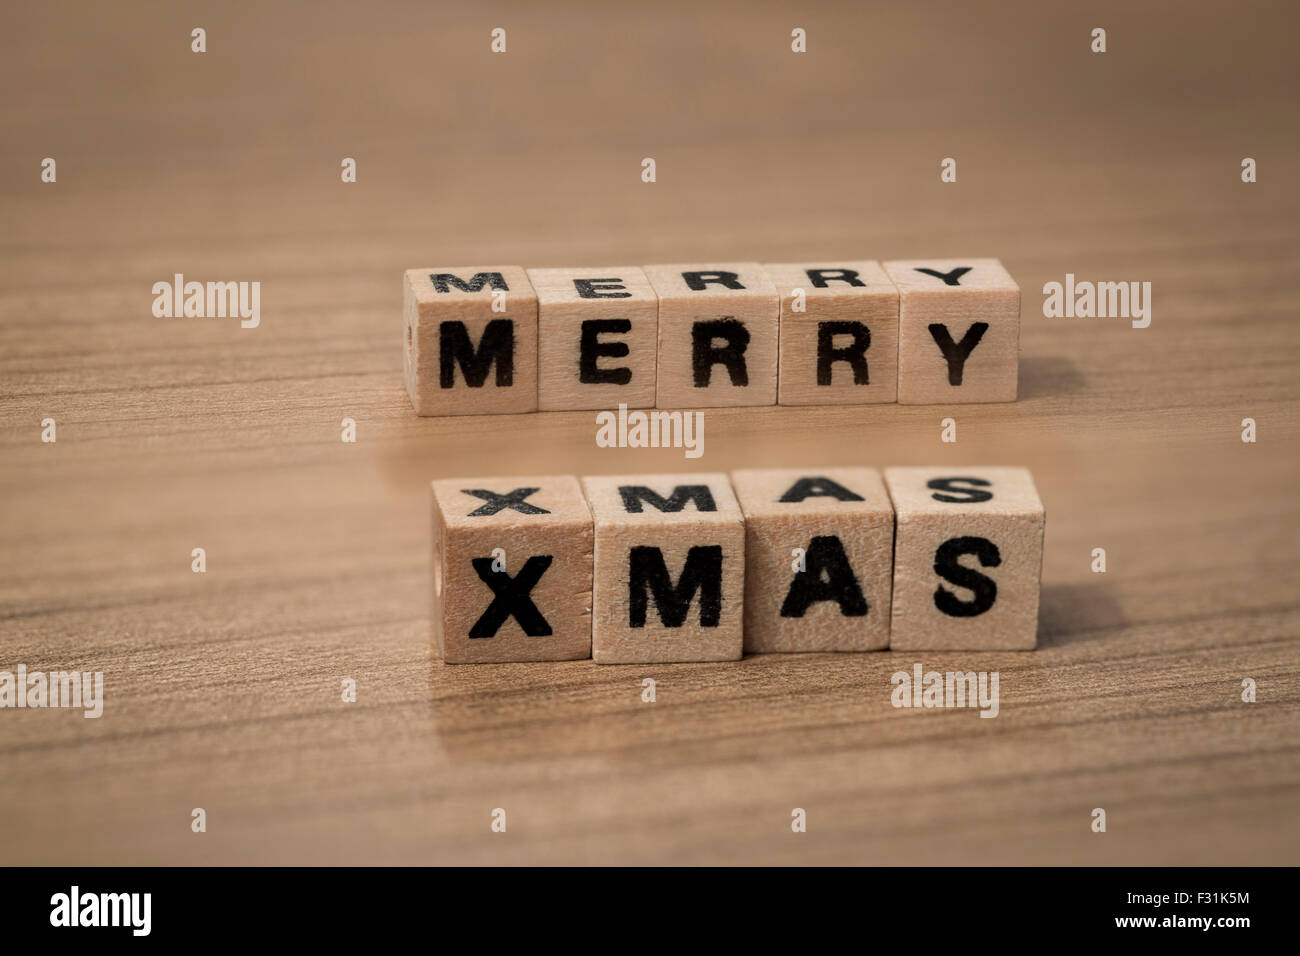 Merry Xmas written in wooden cubes on a desk Stock Photo